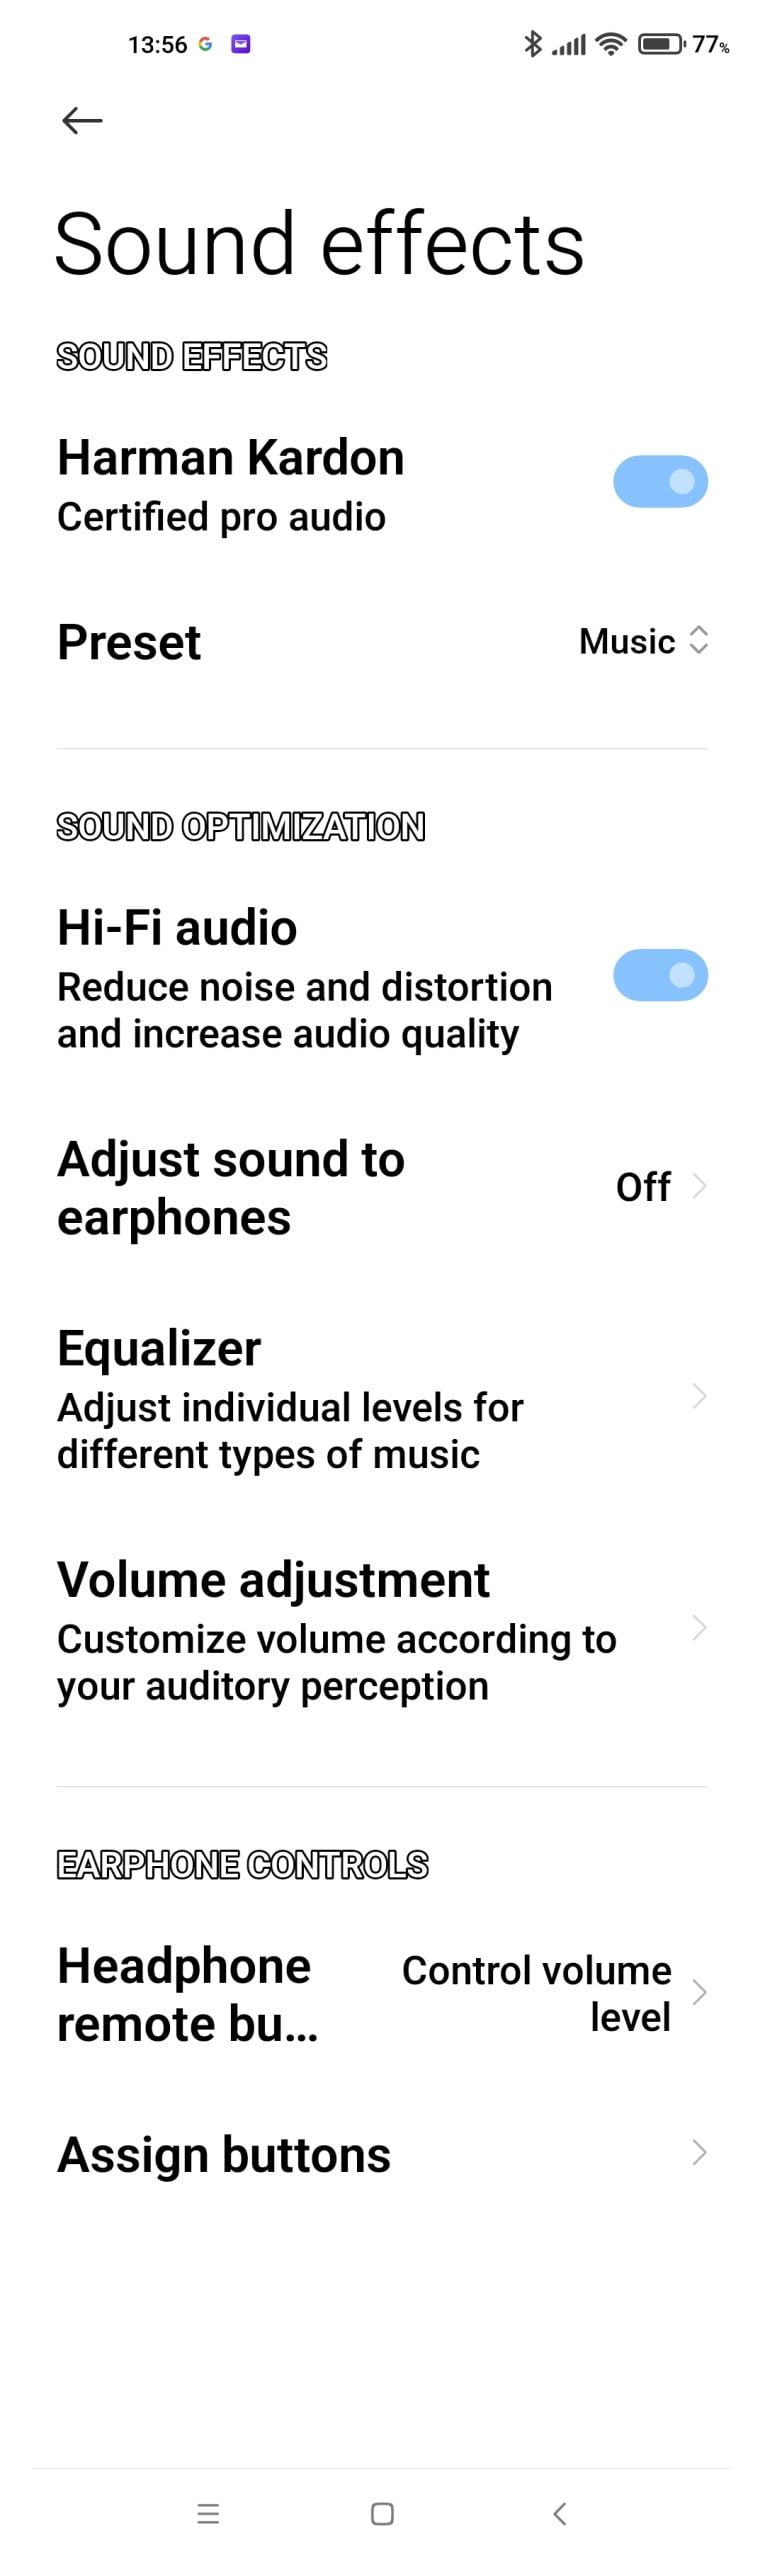 EqualizerEverywhere, the Easiest Way to Adjust Audio in Apps